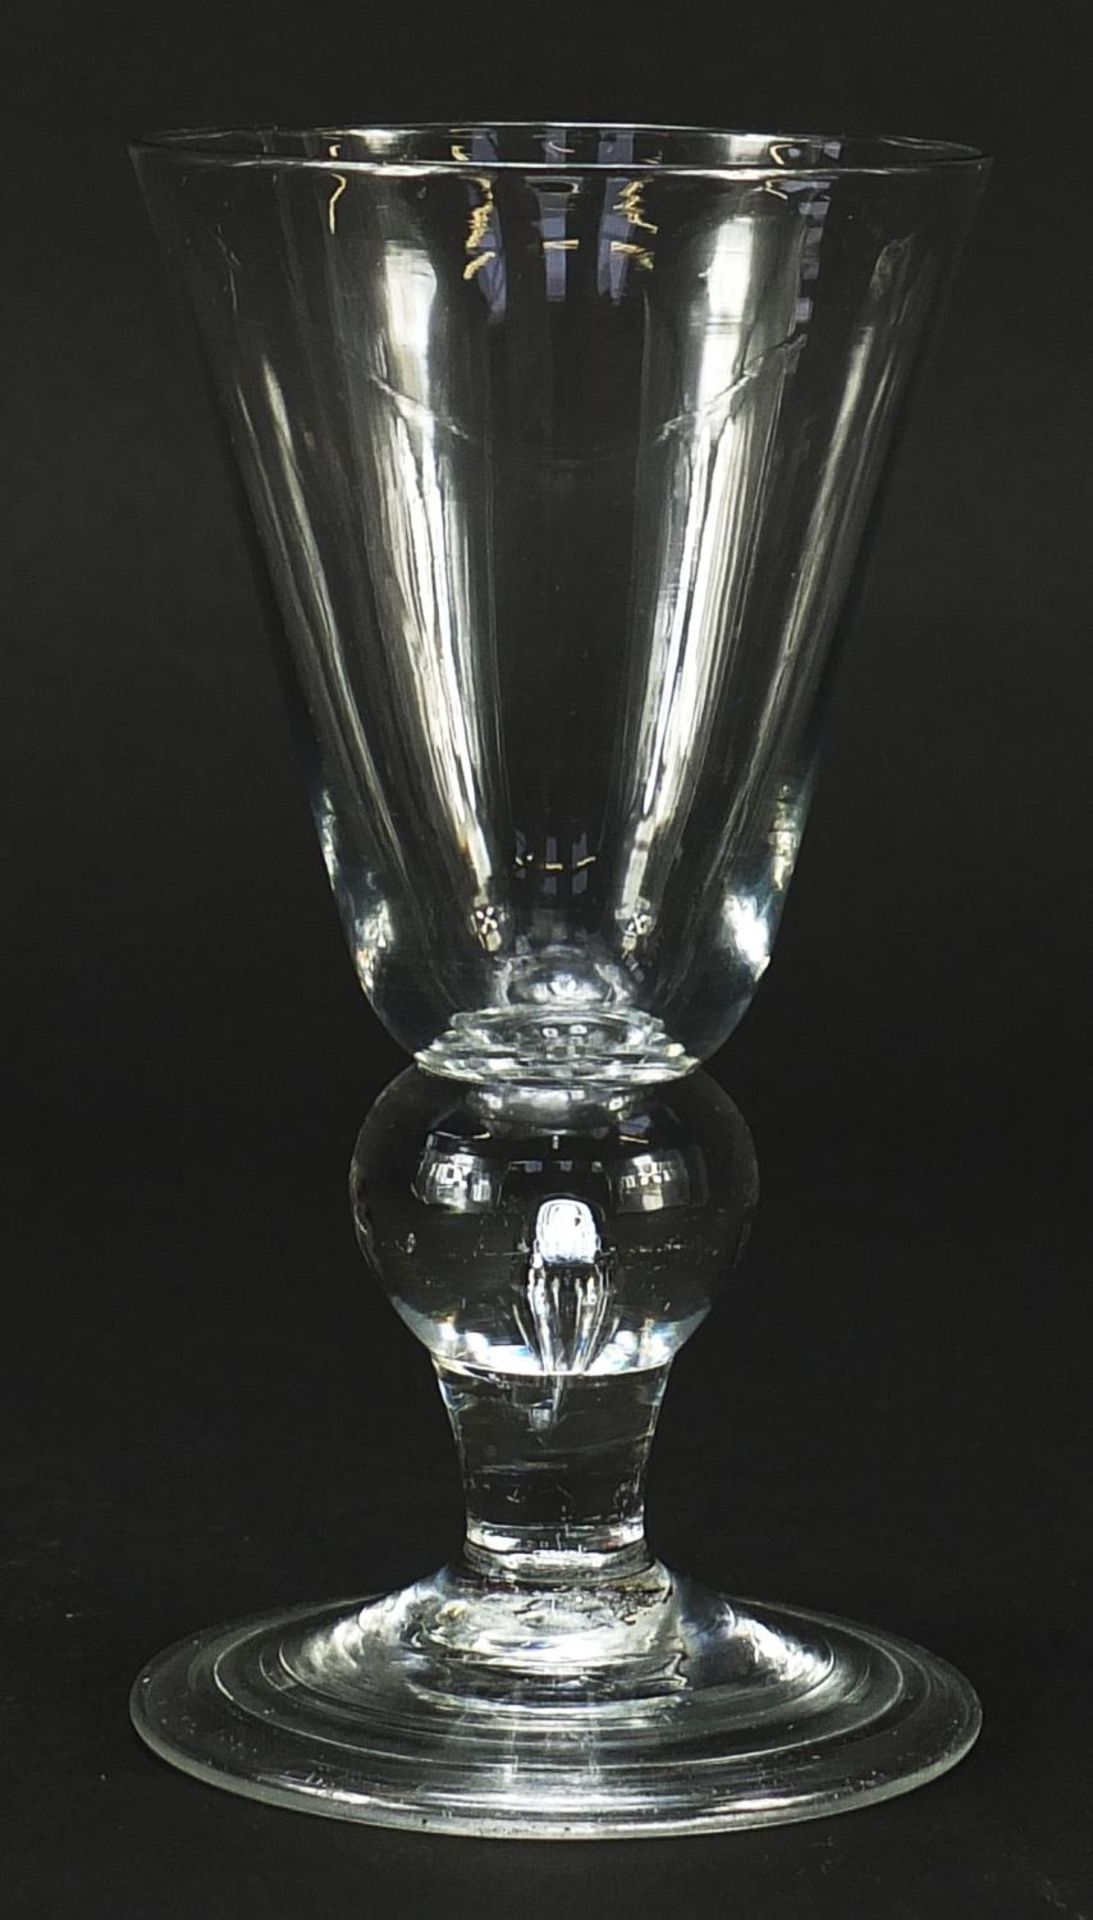 Early 18th century wine glass with folded foot and knopped stem, 12.5cm high